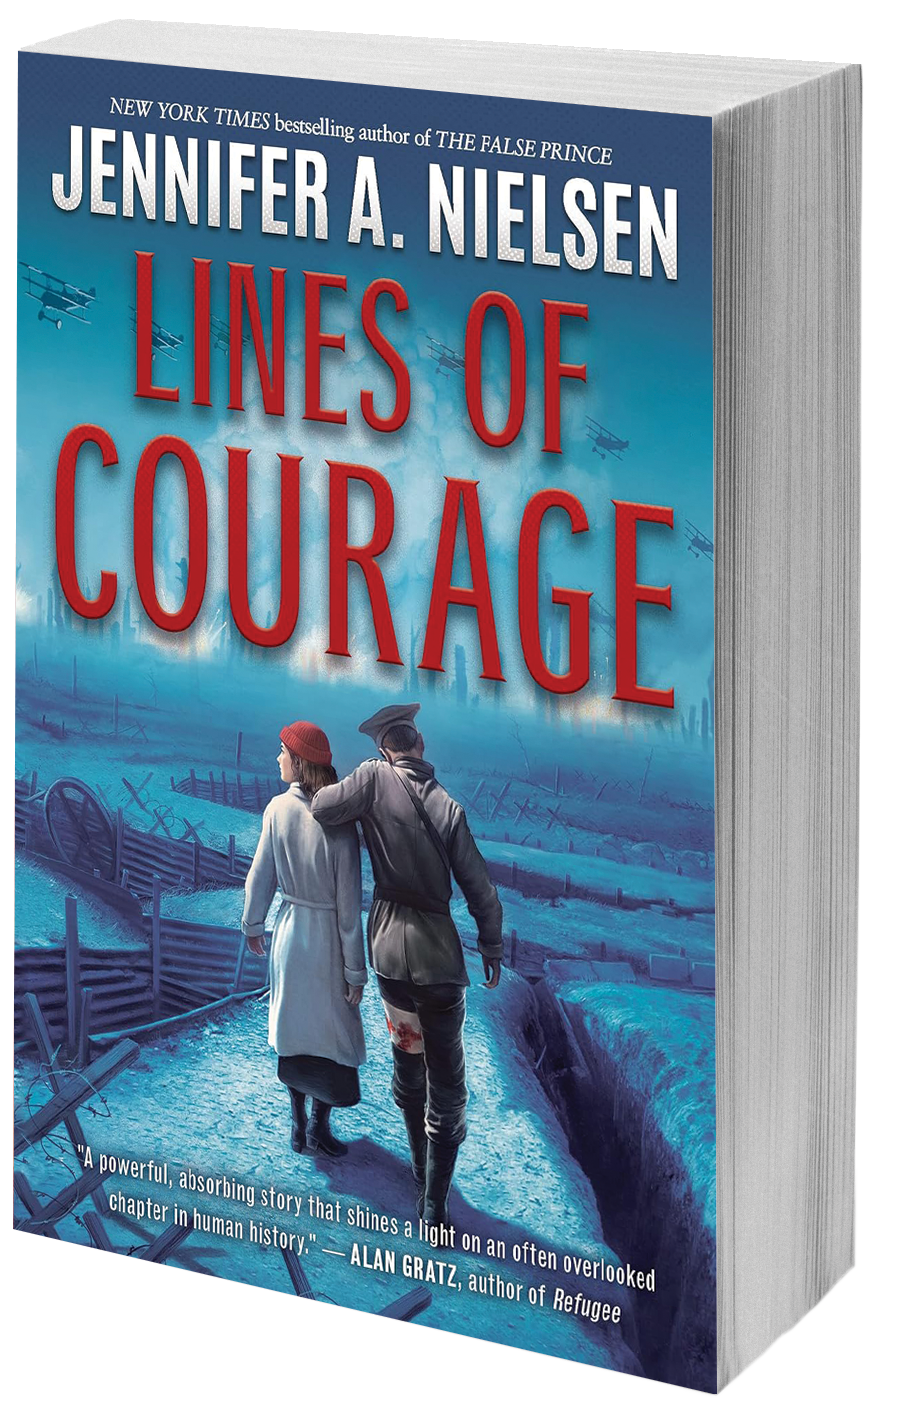 Lines of courage